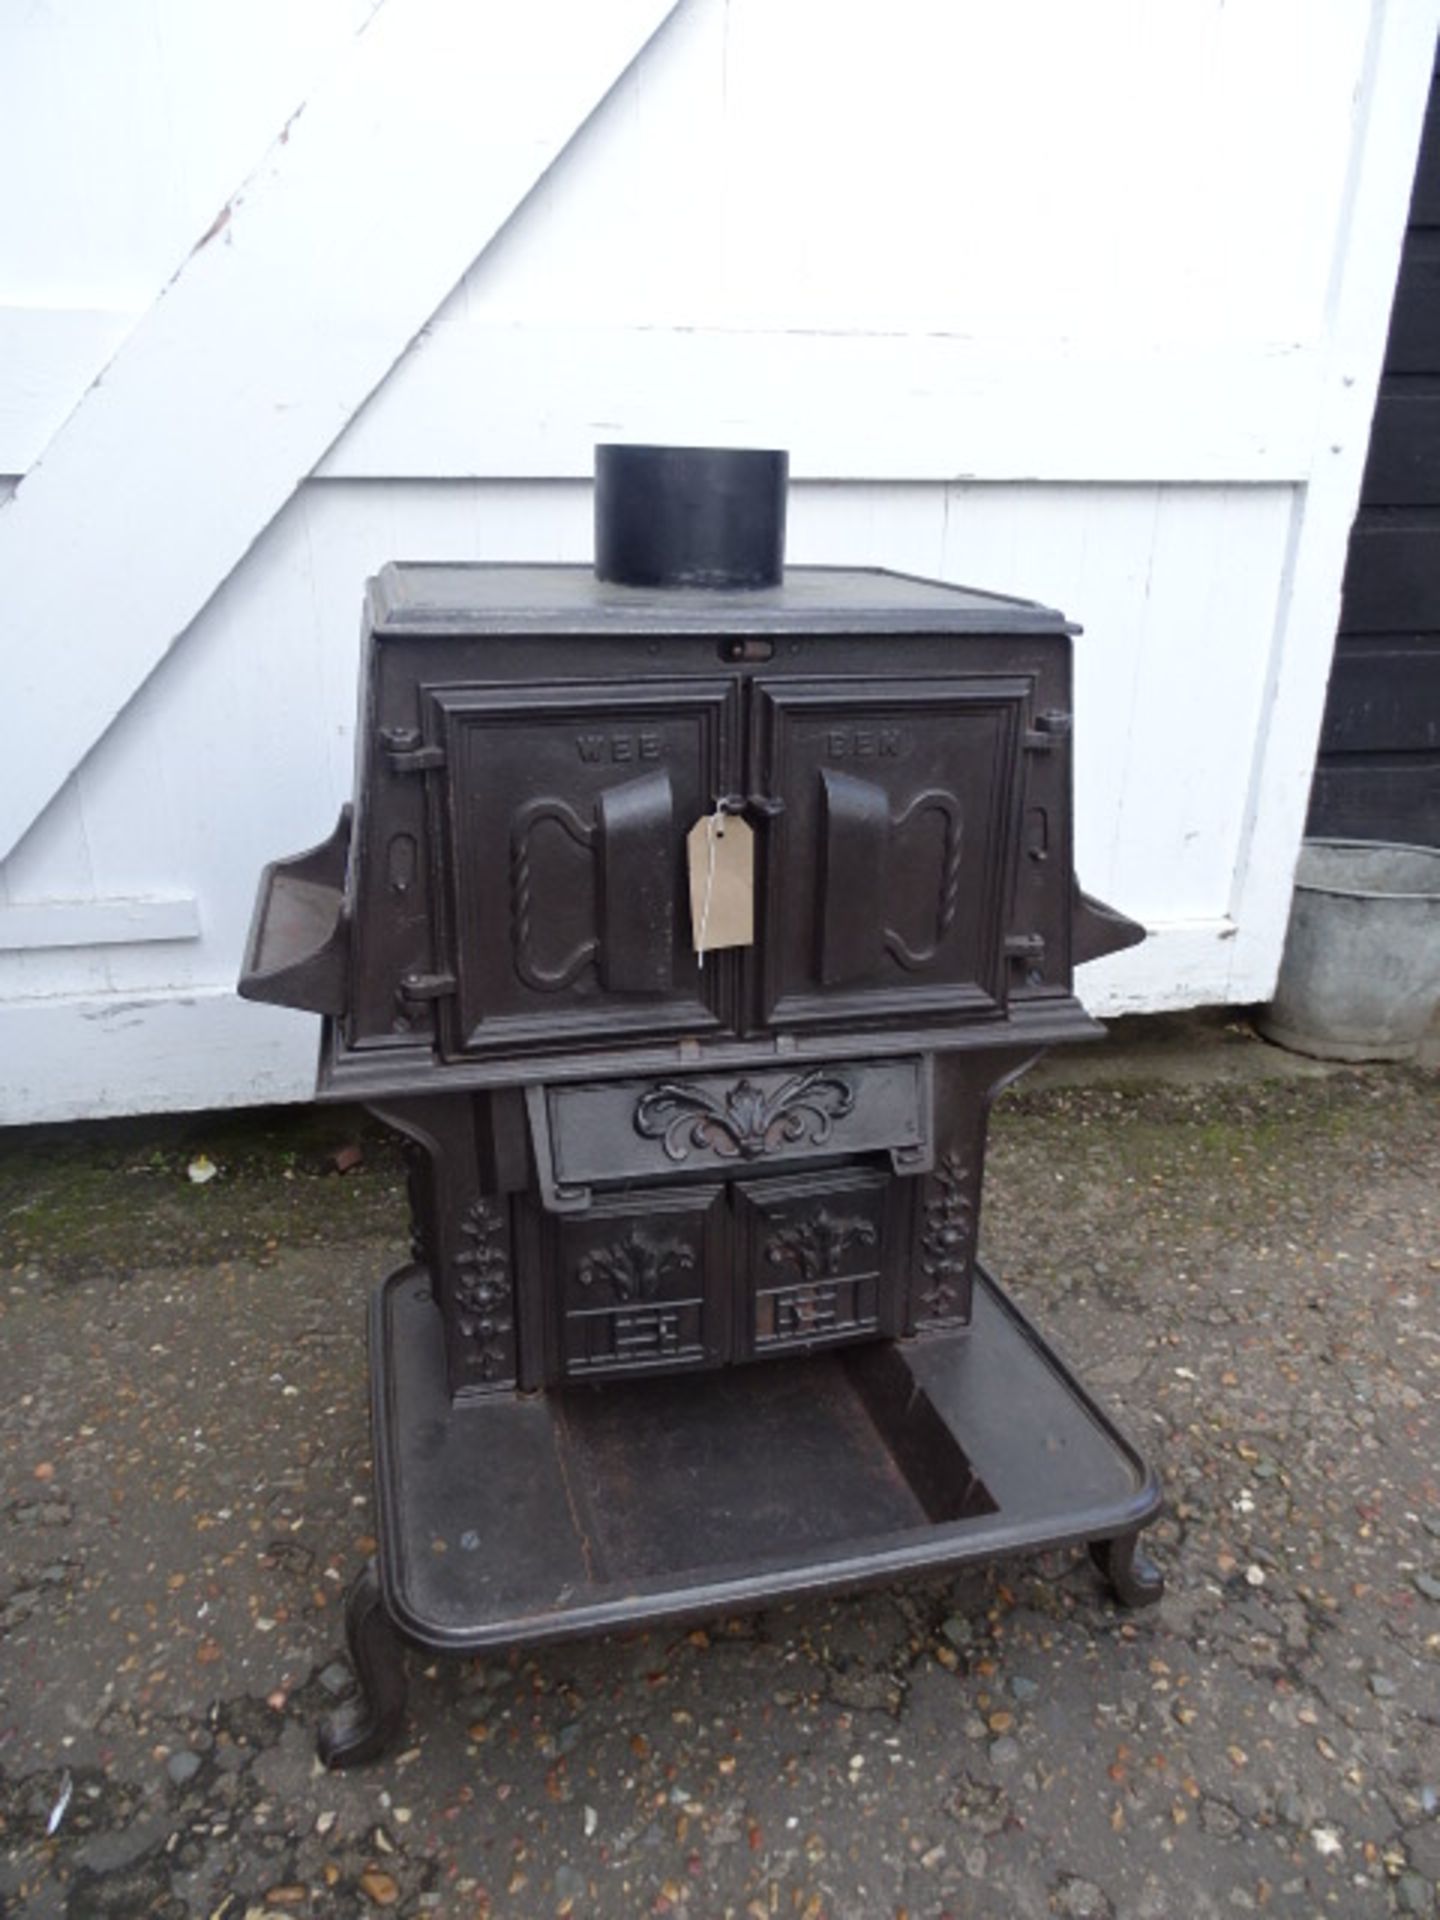 The Wee Ben tailors cast iron laundry stove with ornate door decorations incl two tailor goose irons